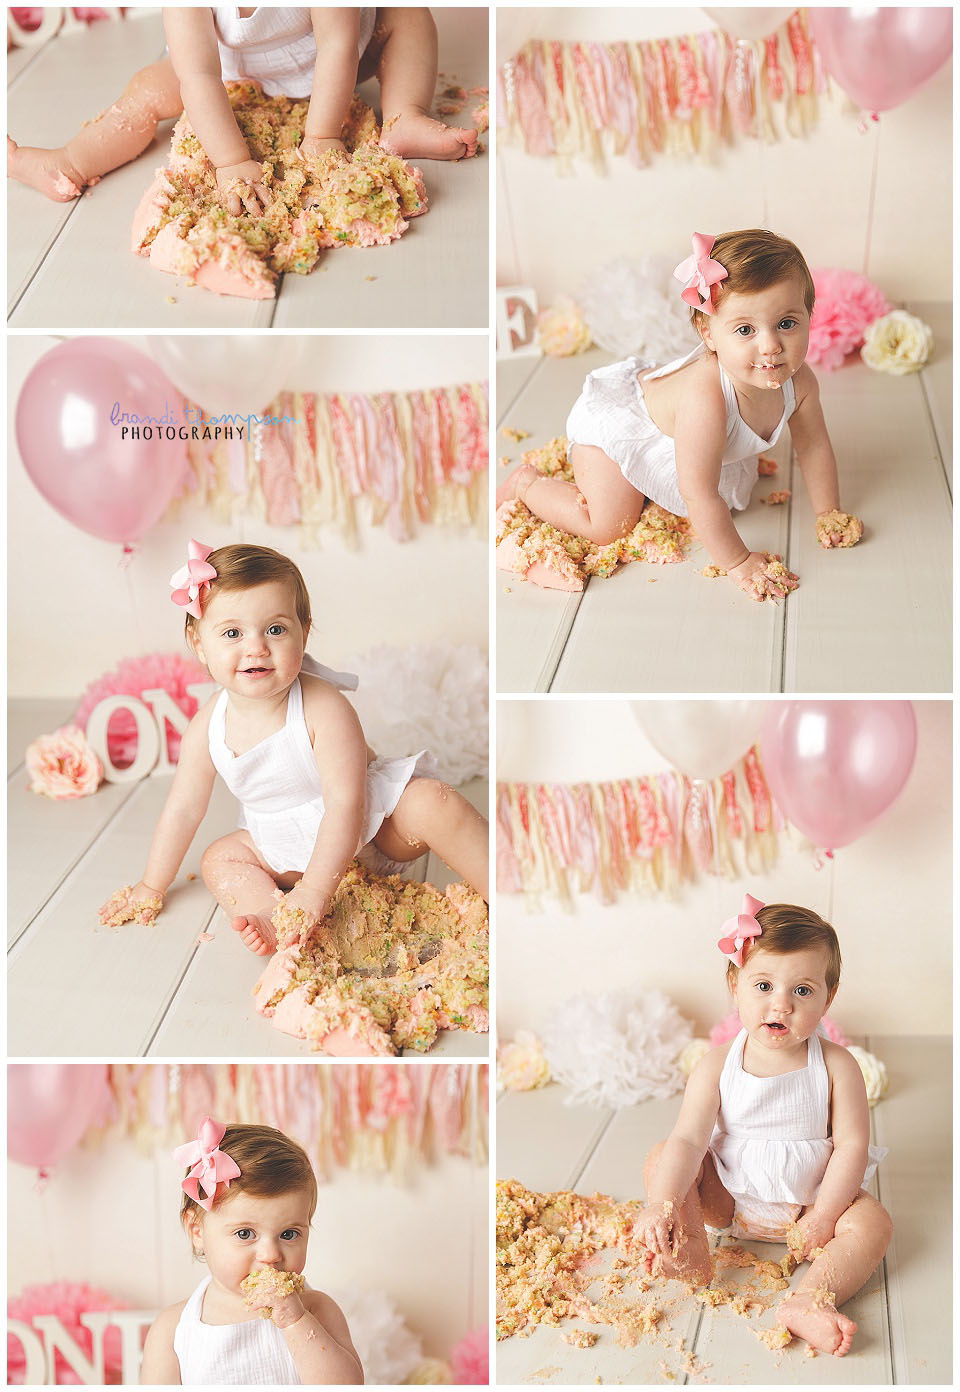 collage of one year old baby girl in studio with pink and white decorations, plano tx photography studio